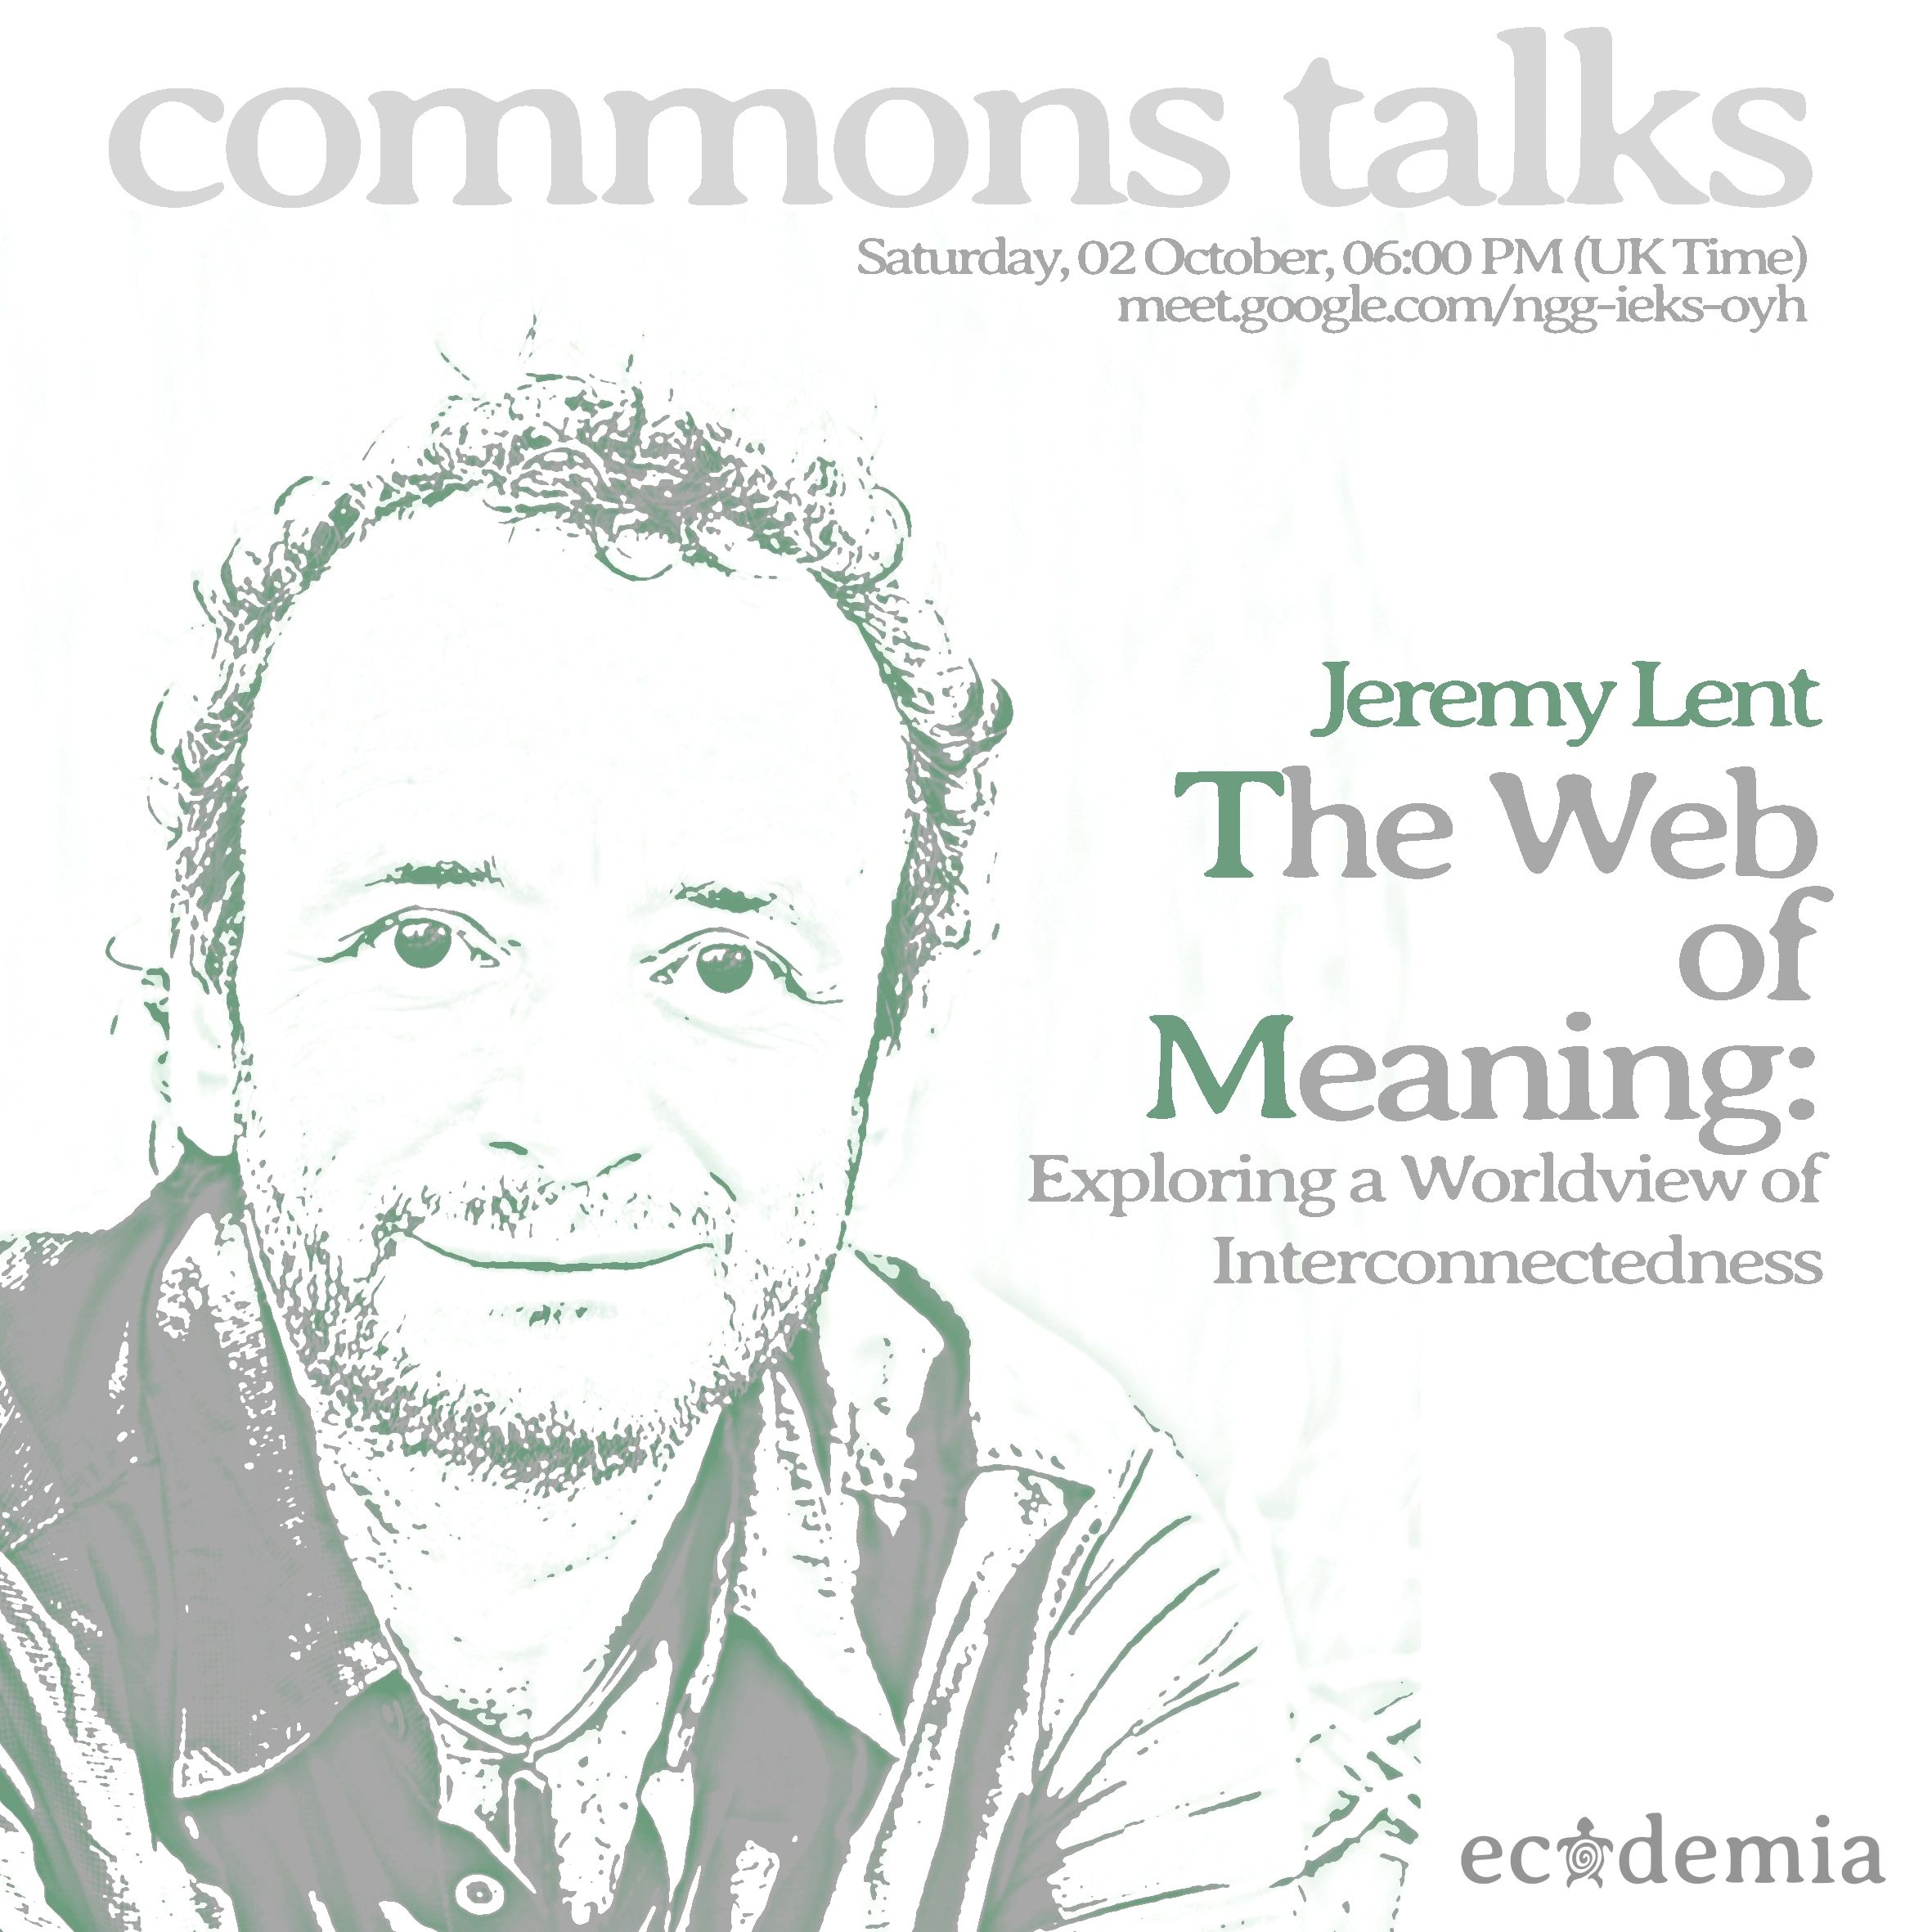 commonstalks: The Web of Meaning by Jeremy Lent